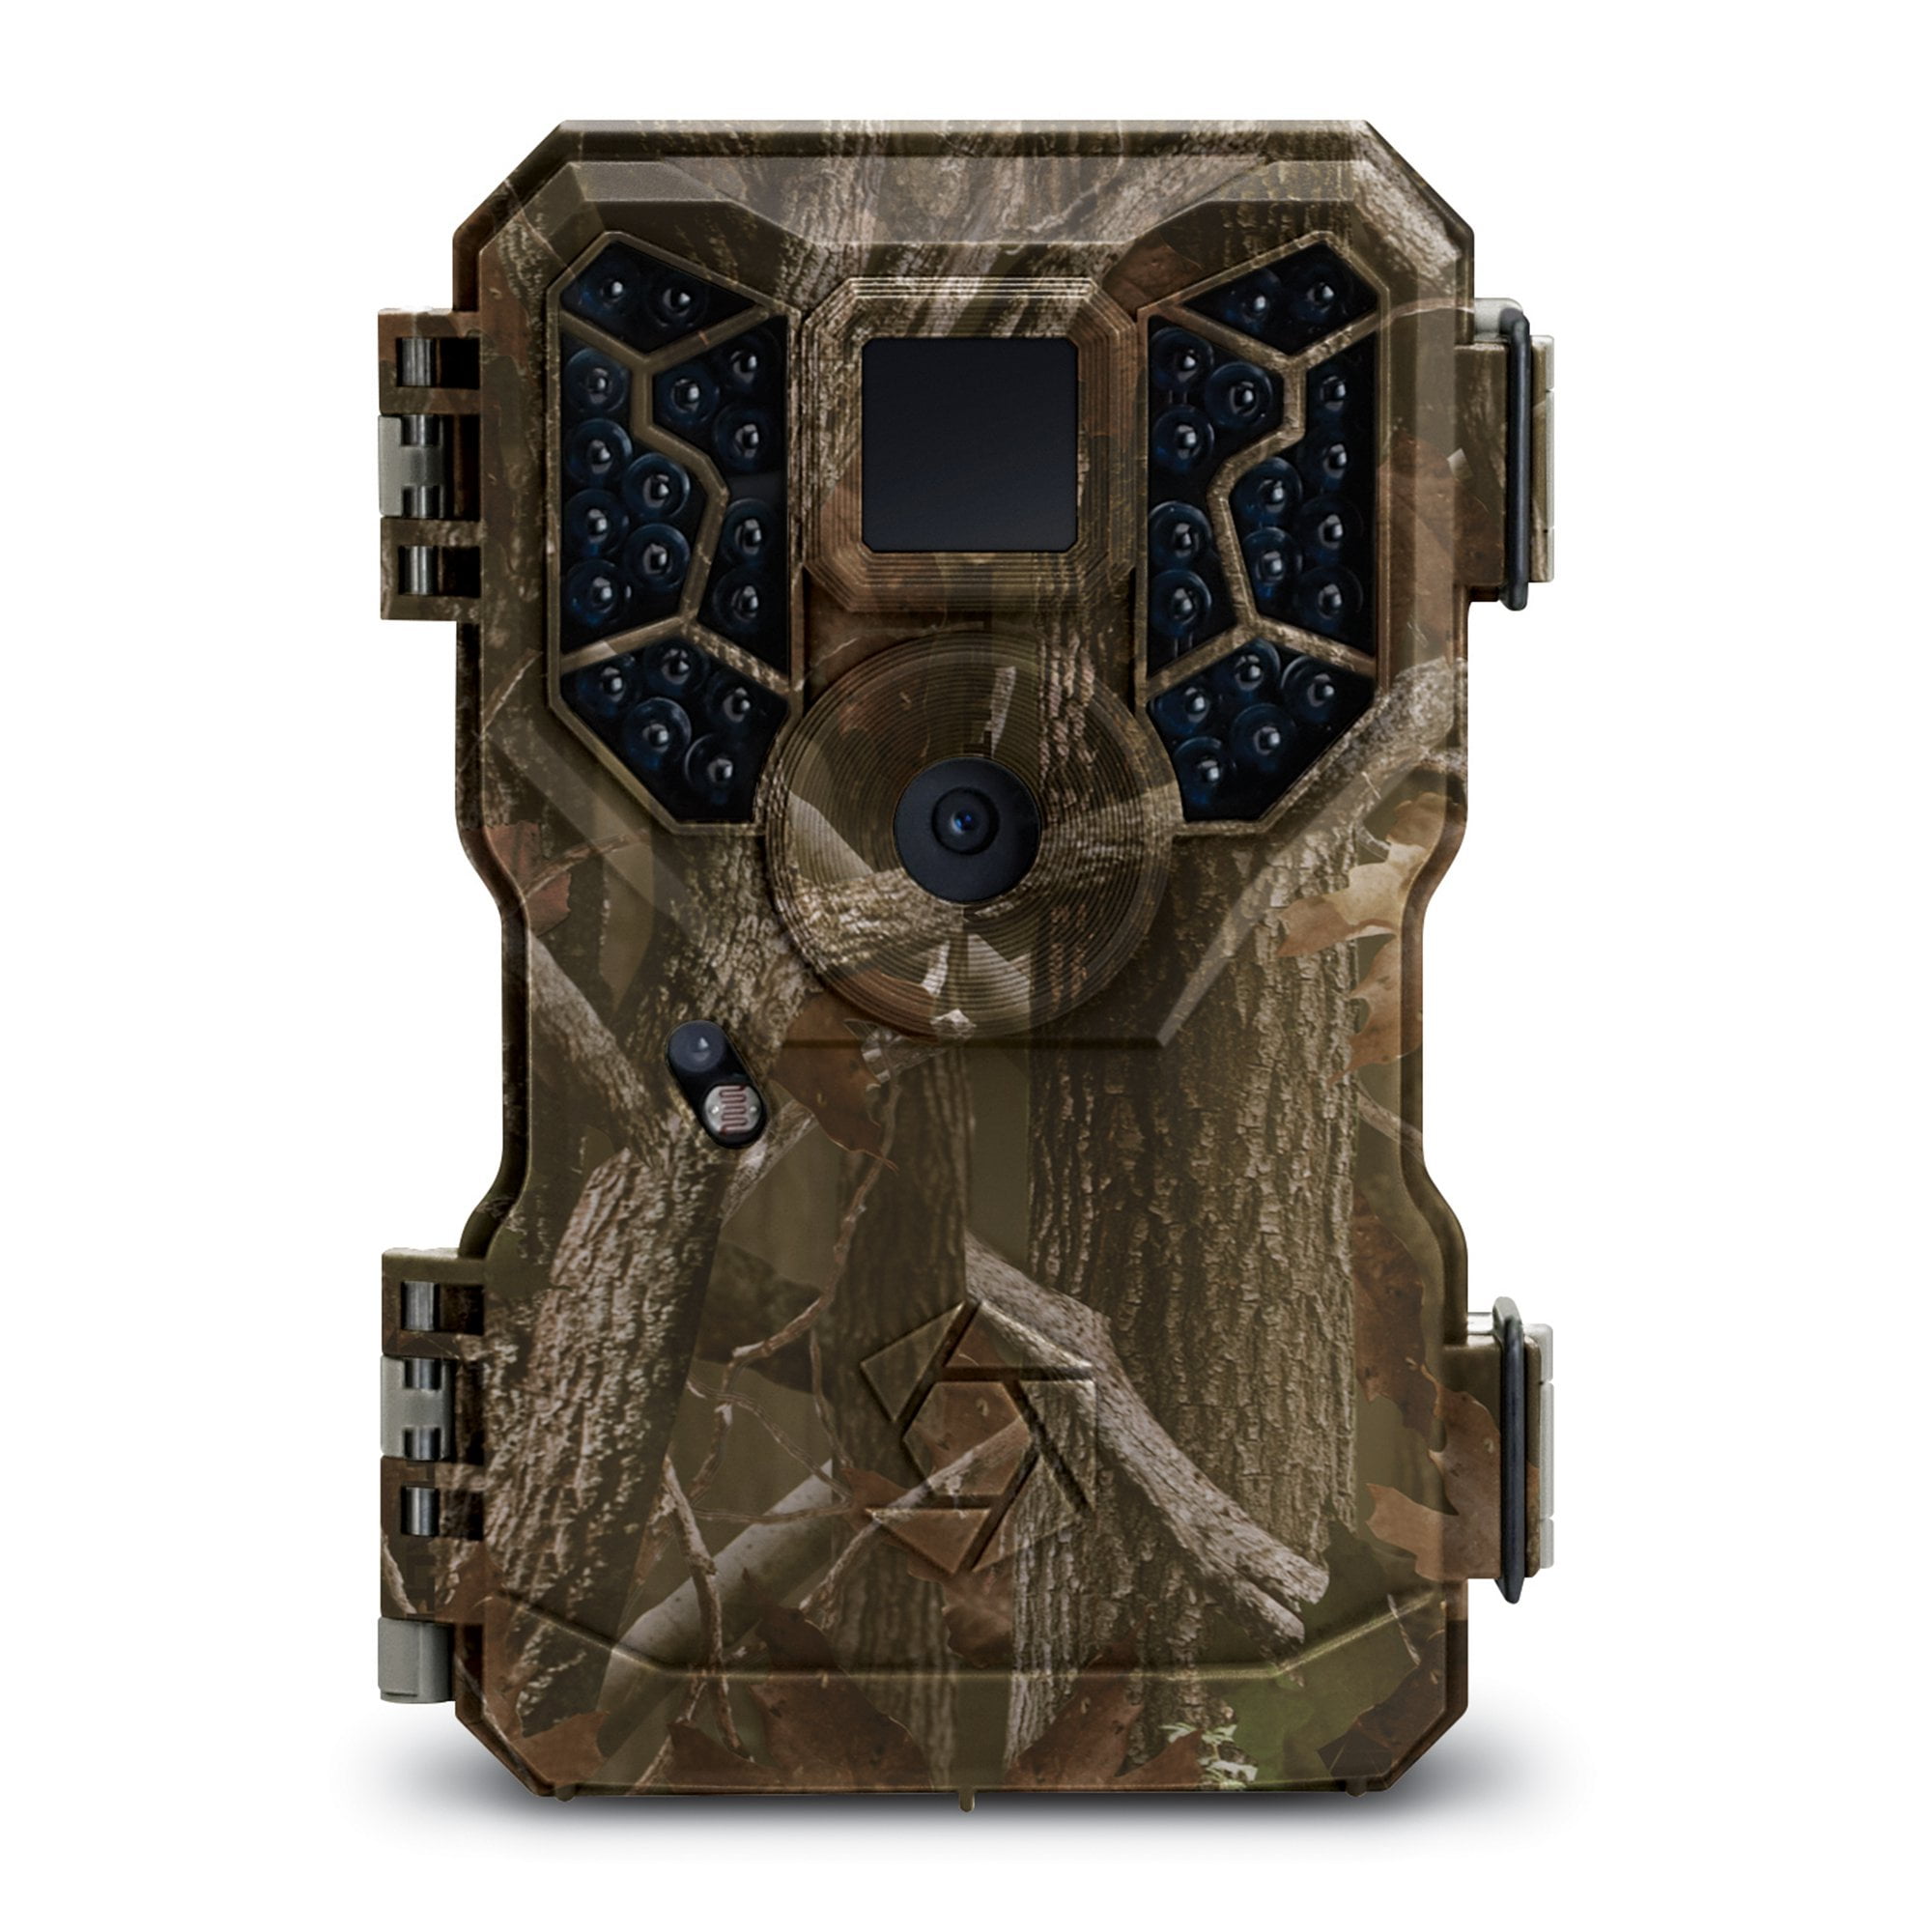 8 MP 70 FT RANGE STEALTH CAM  PX36NG  NO GLO INFRARED SCOUTING CAMERA 